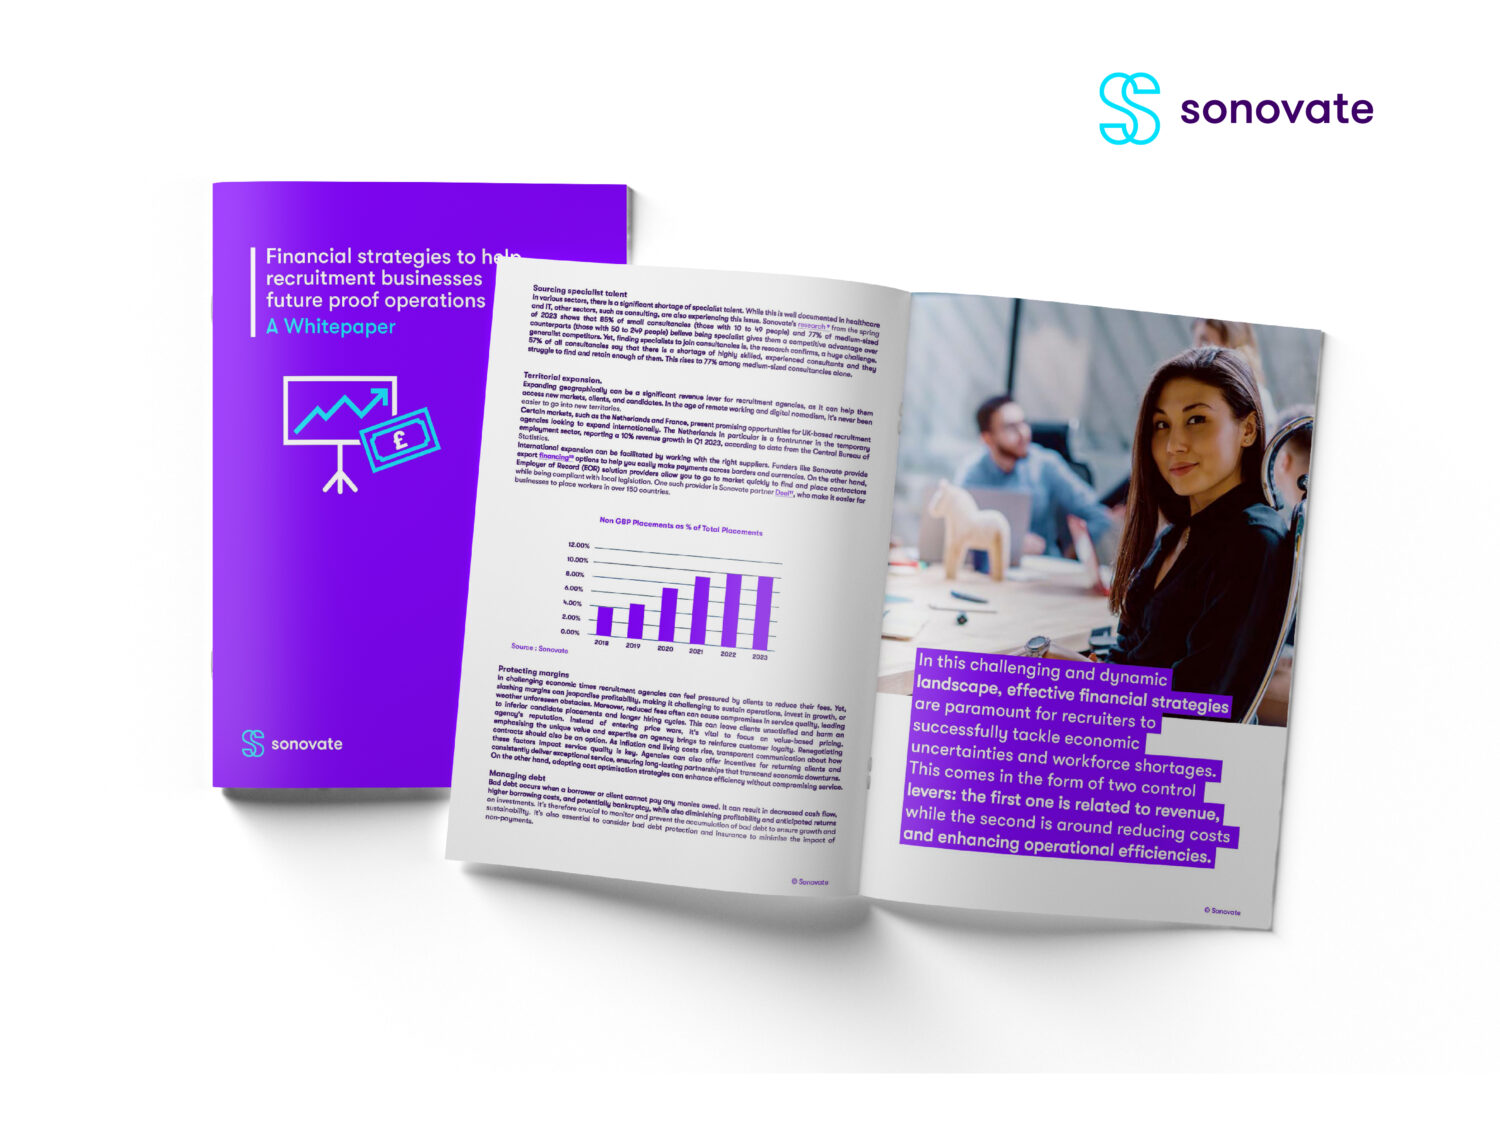 The future of recruitment is intertwined with technology and innovation. Our experience at Sonovate has taught us that seamless integration and efficiency across the supply chain are essential. In our latest white paper, we dive into actionable strategies for recruitment businesses to stay ahead of the game, from AI integration to diversifying portfolios. Don't miss out on these insights!